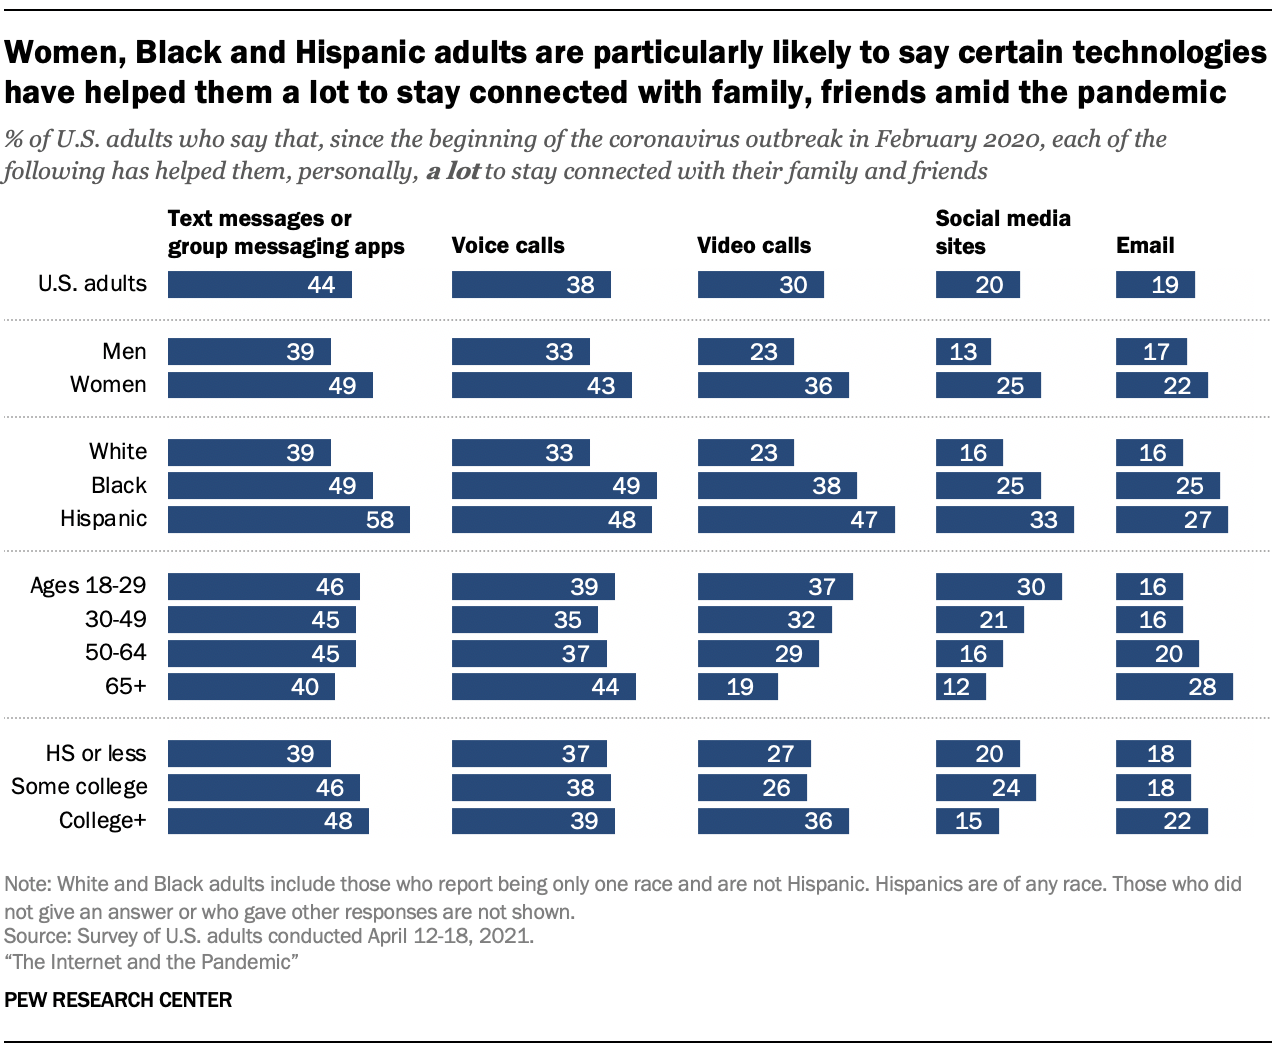 Women, Black and Hispanic adults are particularly likely to say certain technologies have helped them a lot to stay connected with family, friends amid the pandemic